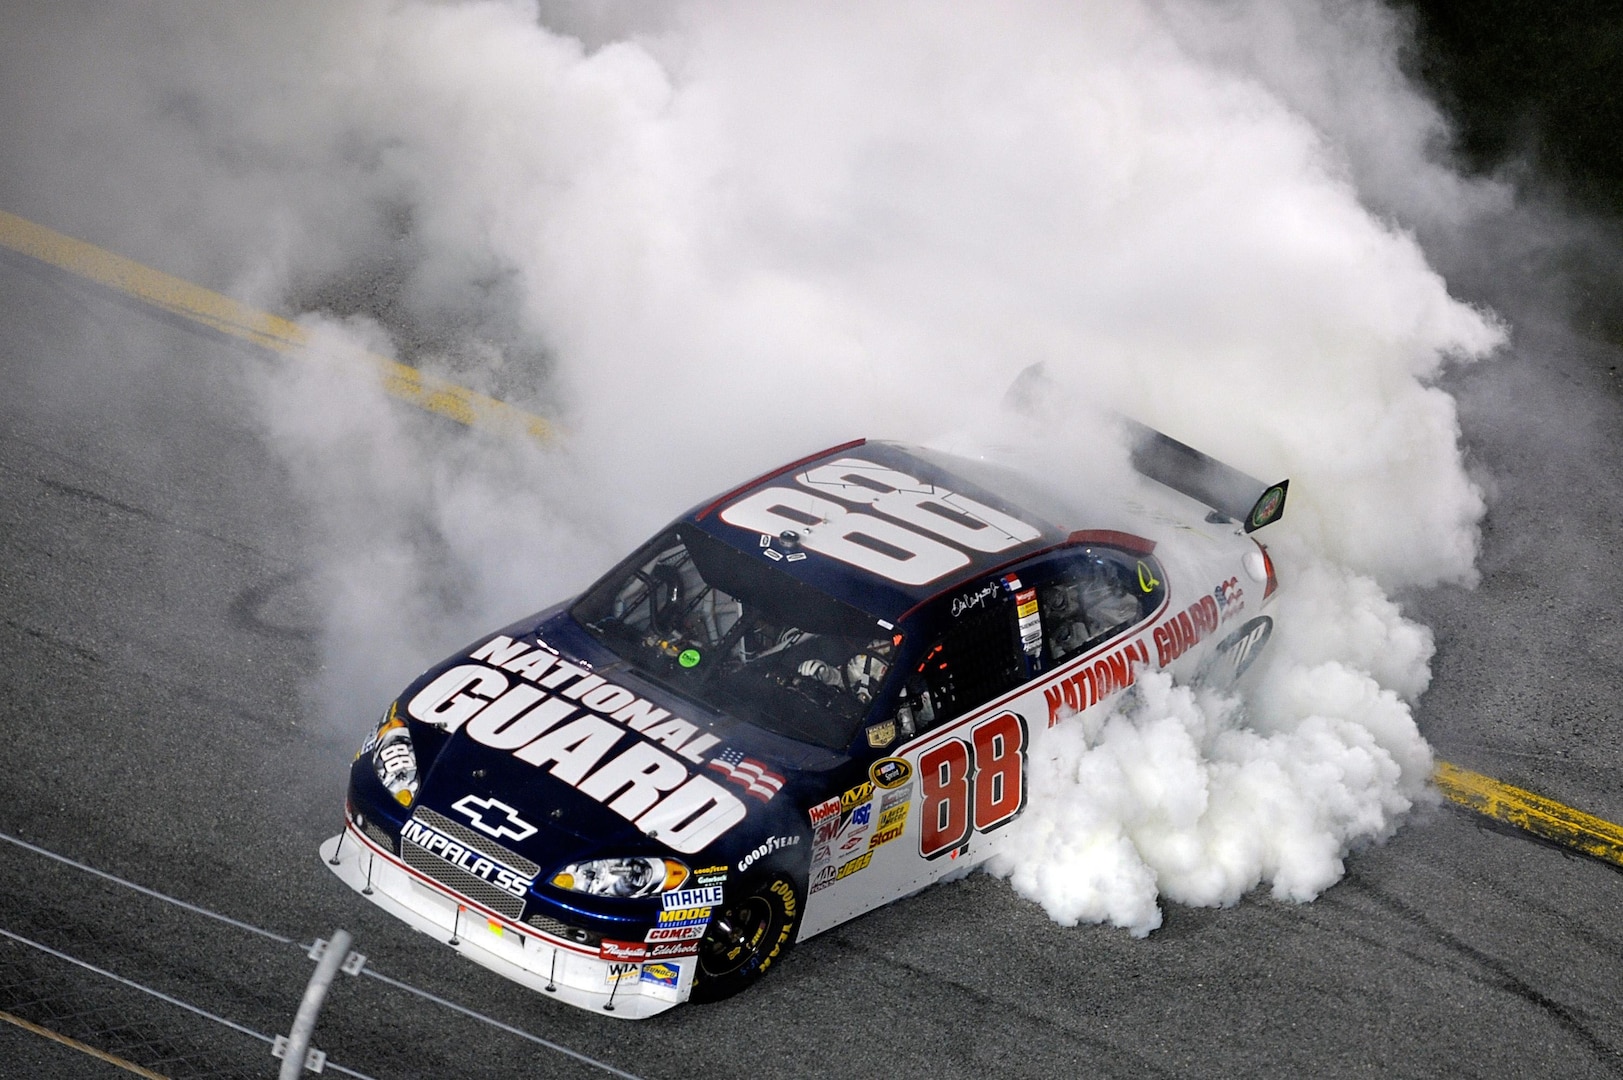 Earnhardt wins Shootout in Guard car > National Guard > Article View